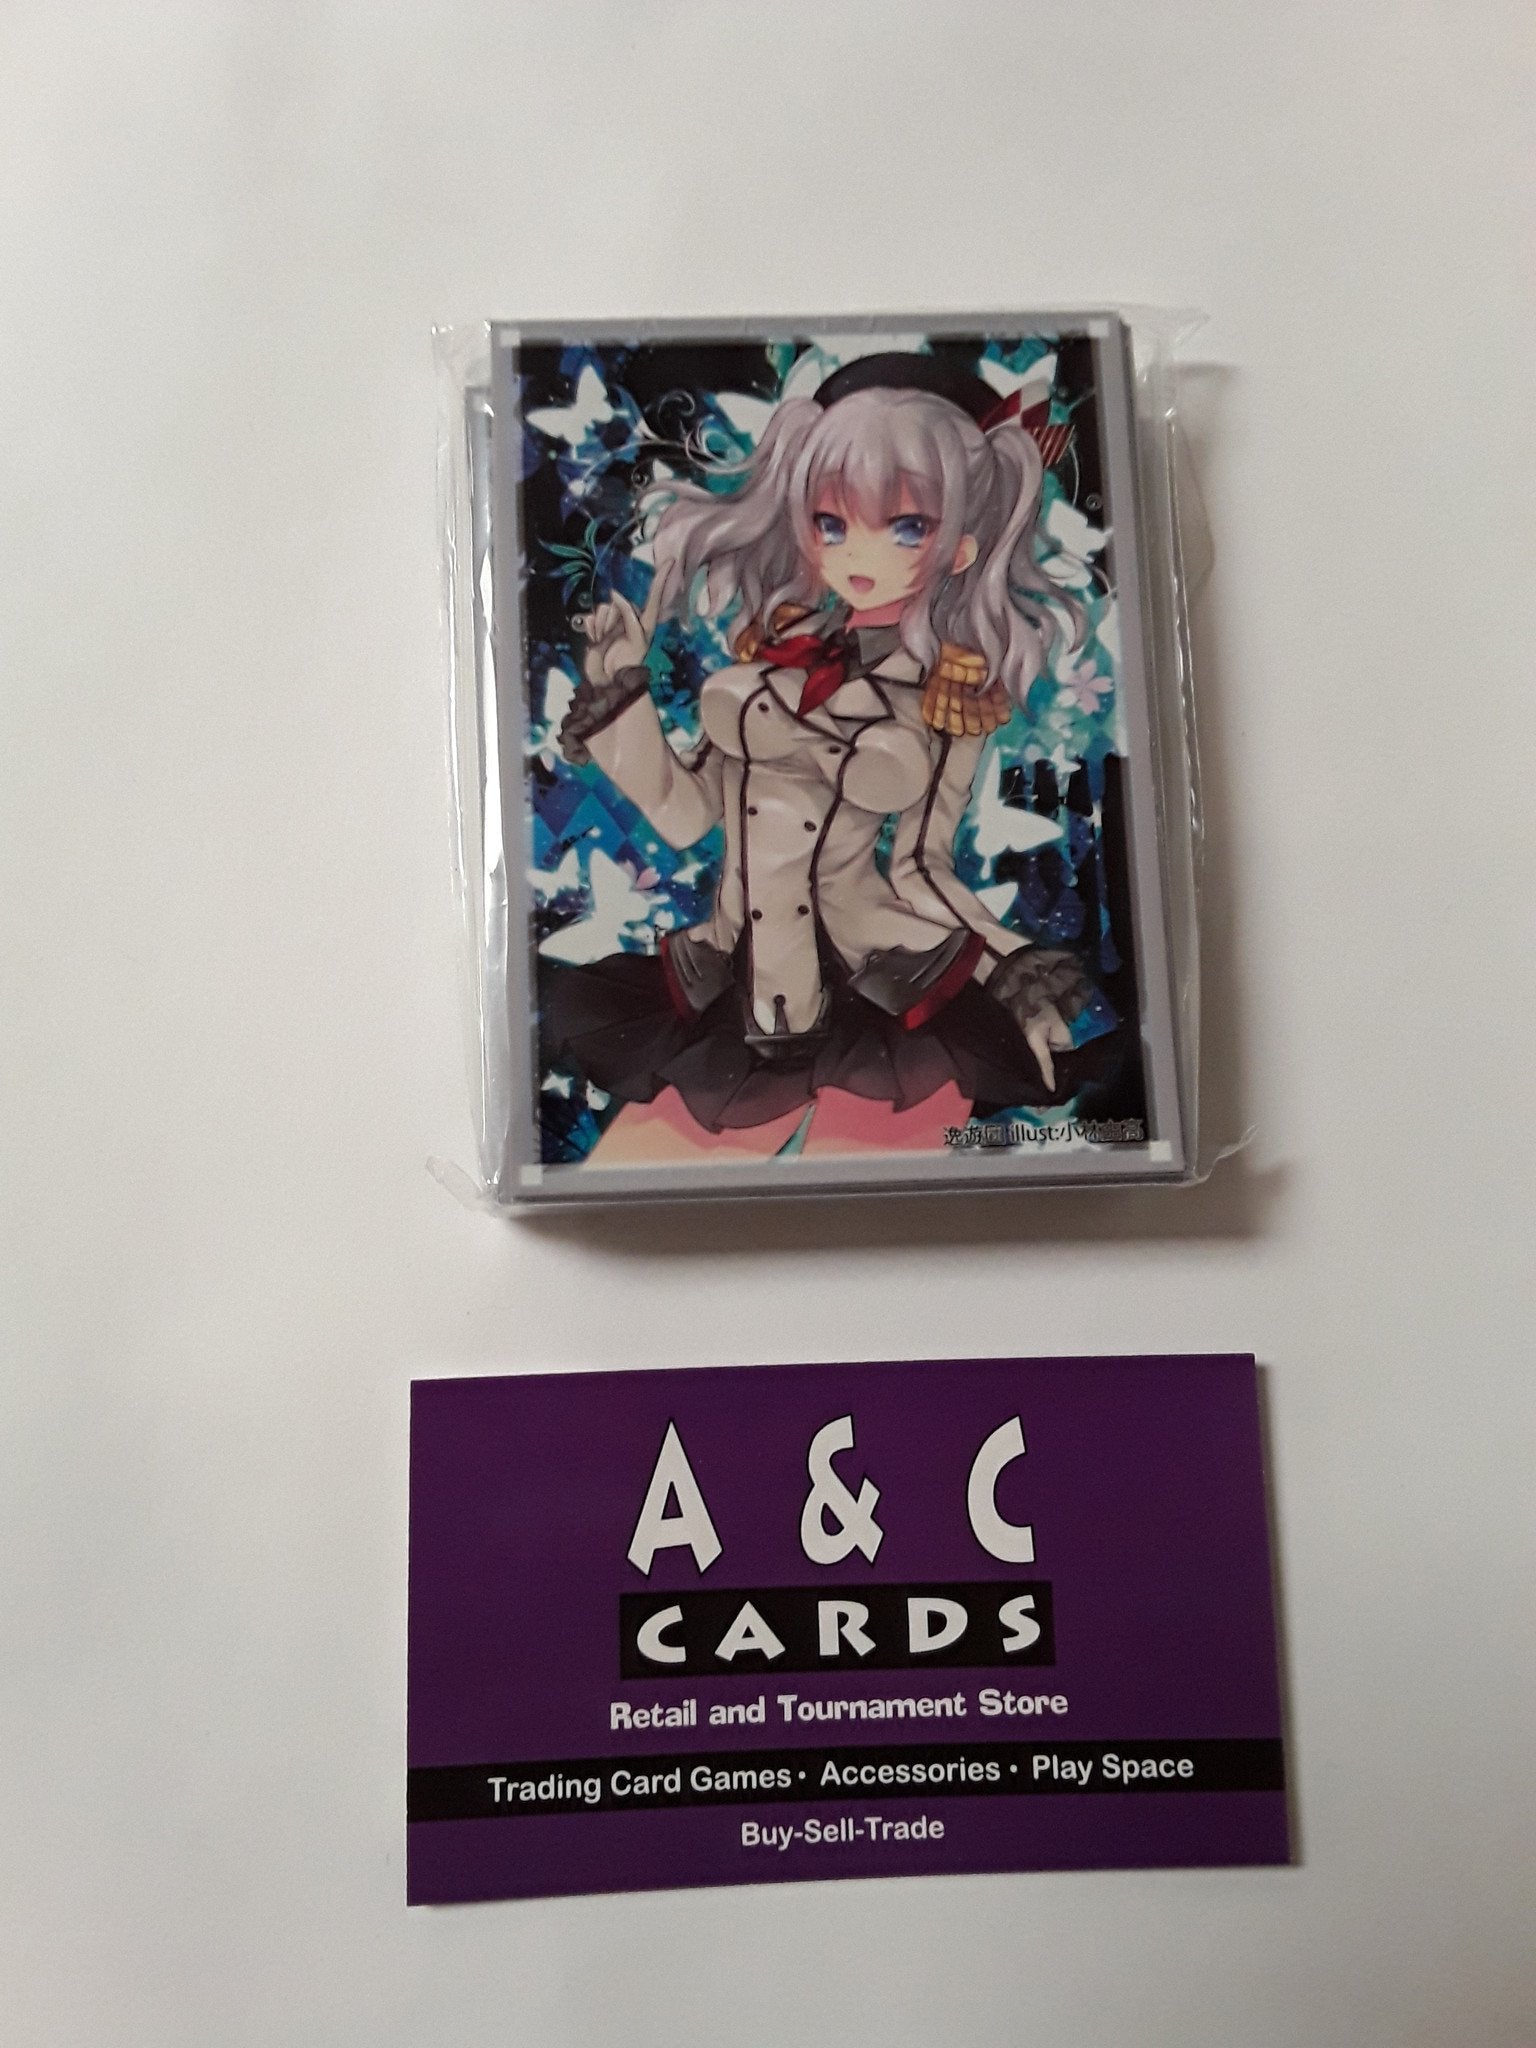 Character Sleeves "Kashima" #1 - 1 pack of Standard Size Sleeves - Kantai Collection